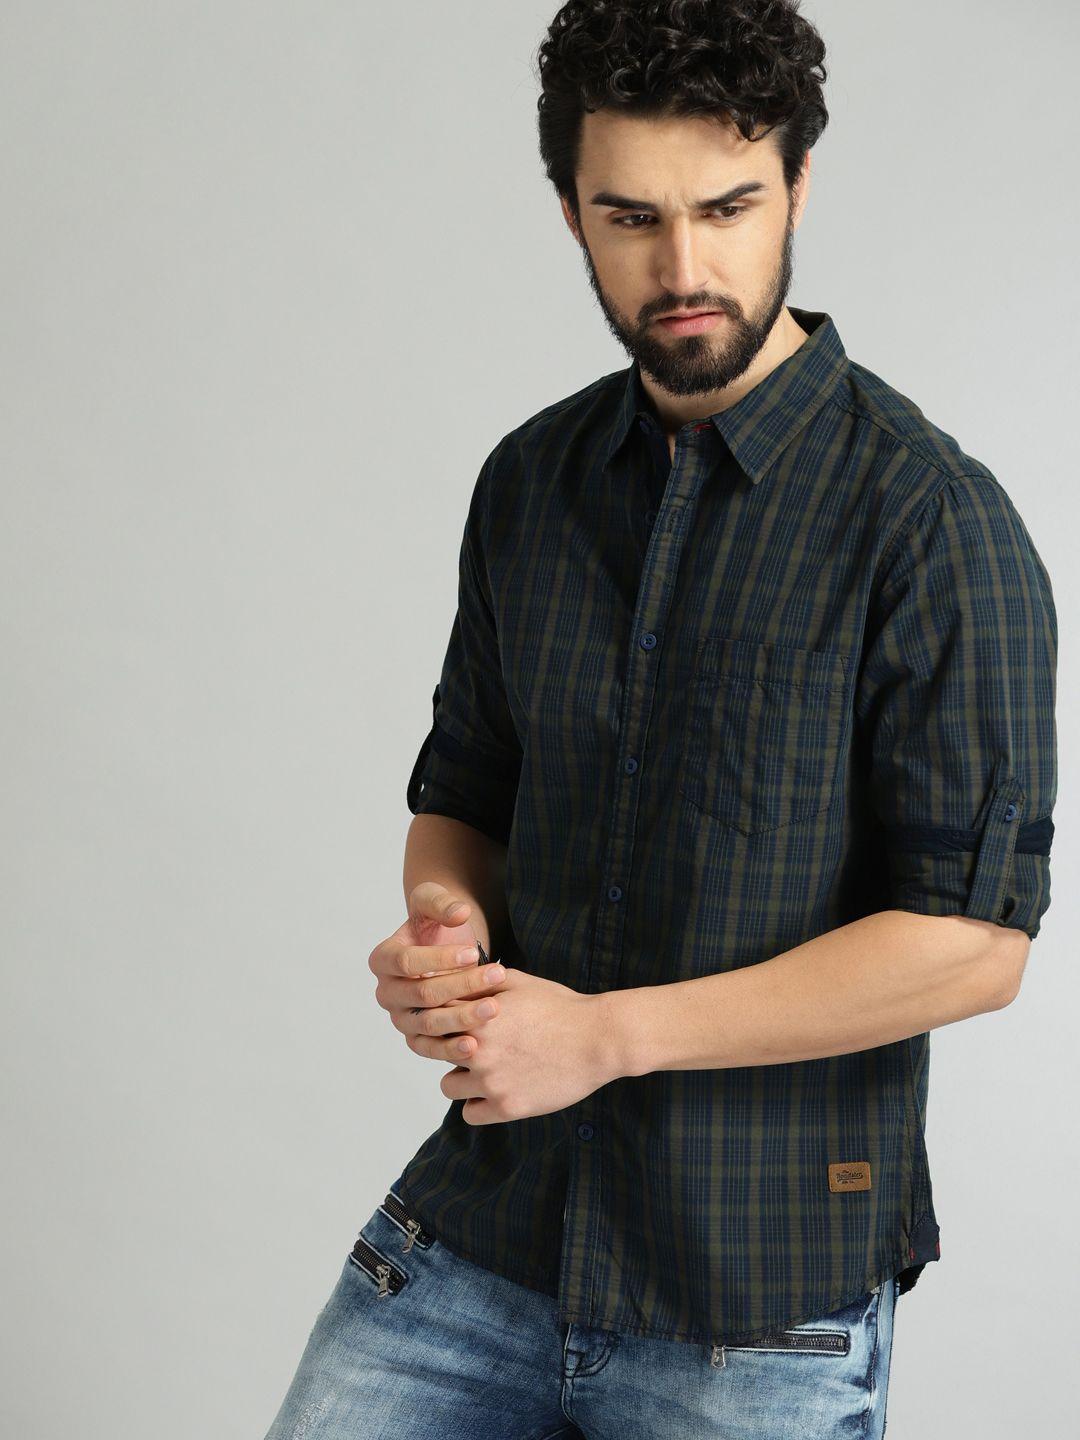 the-roadster-lifestyle-co-men-olive-green-&-navy-blue-regular-fit-checked-sustainable-casual-shirt